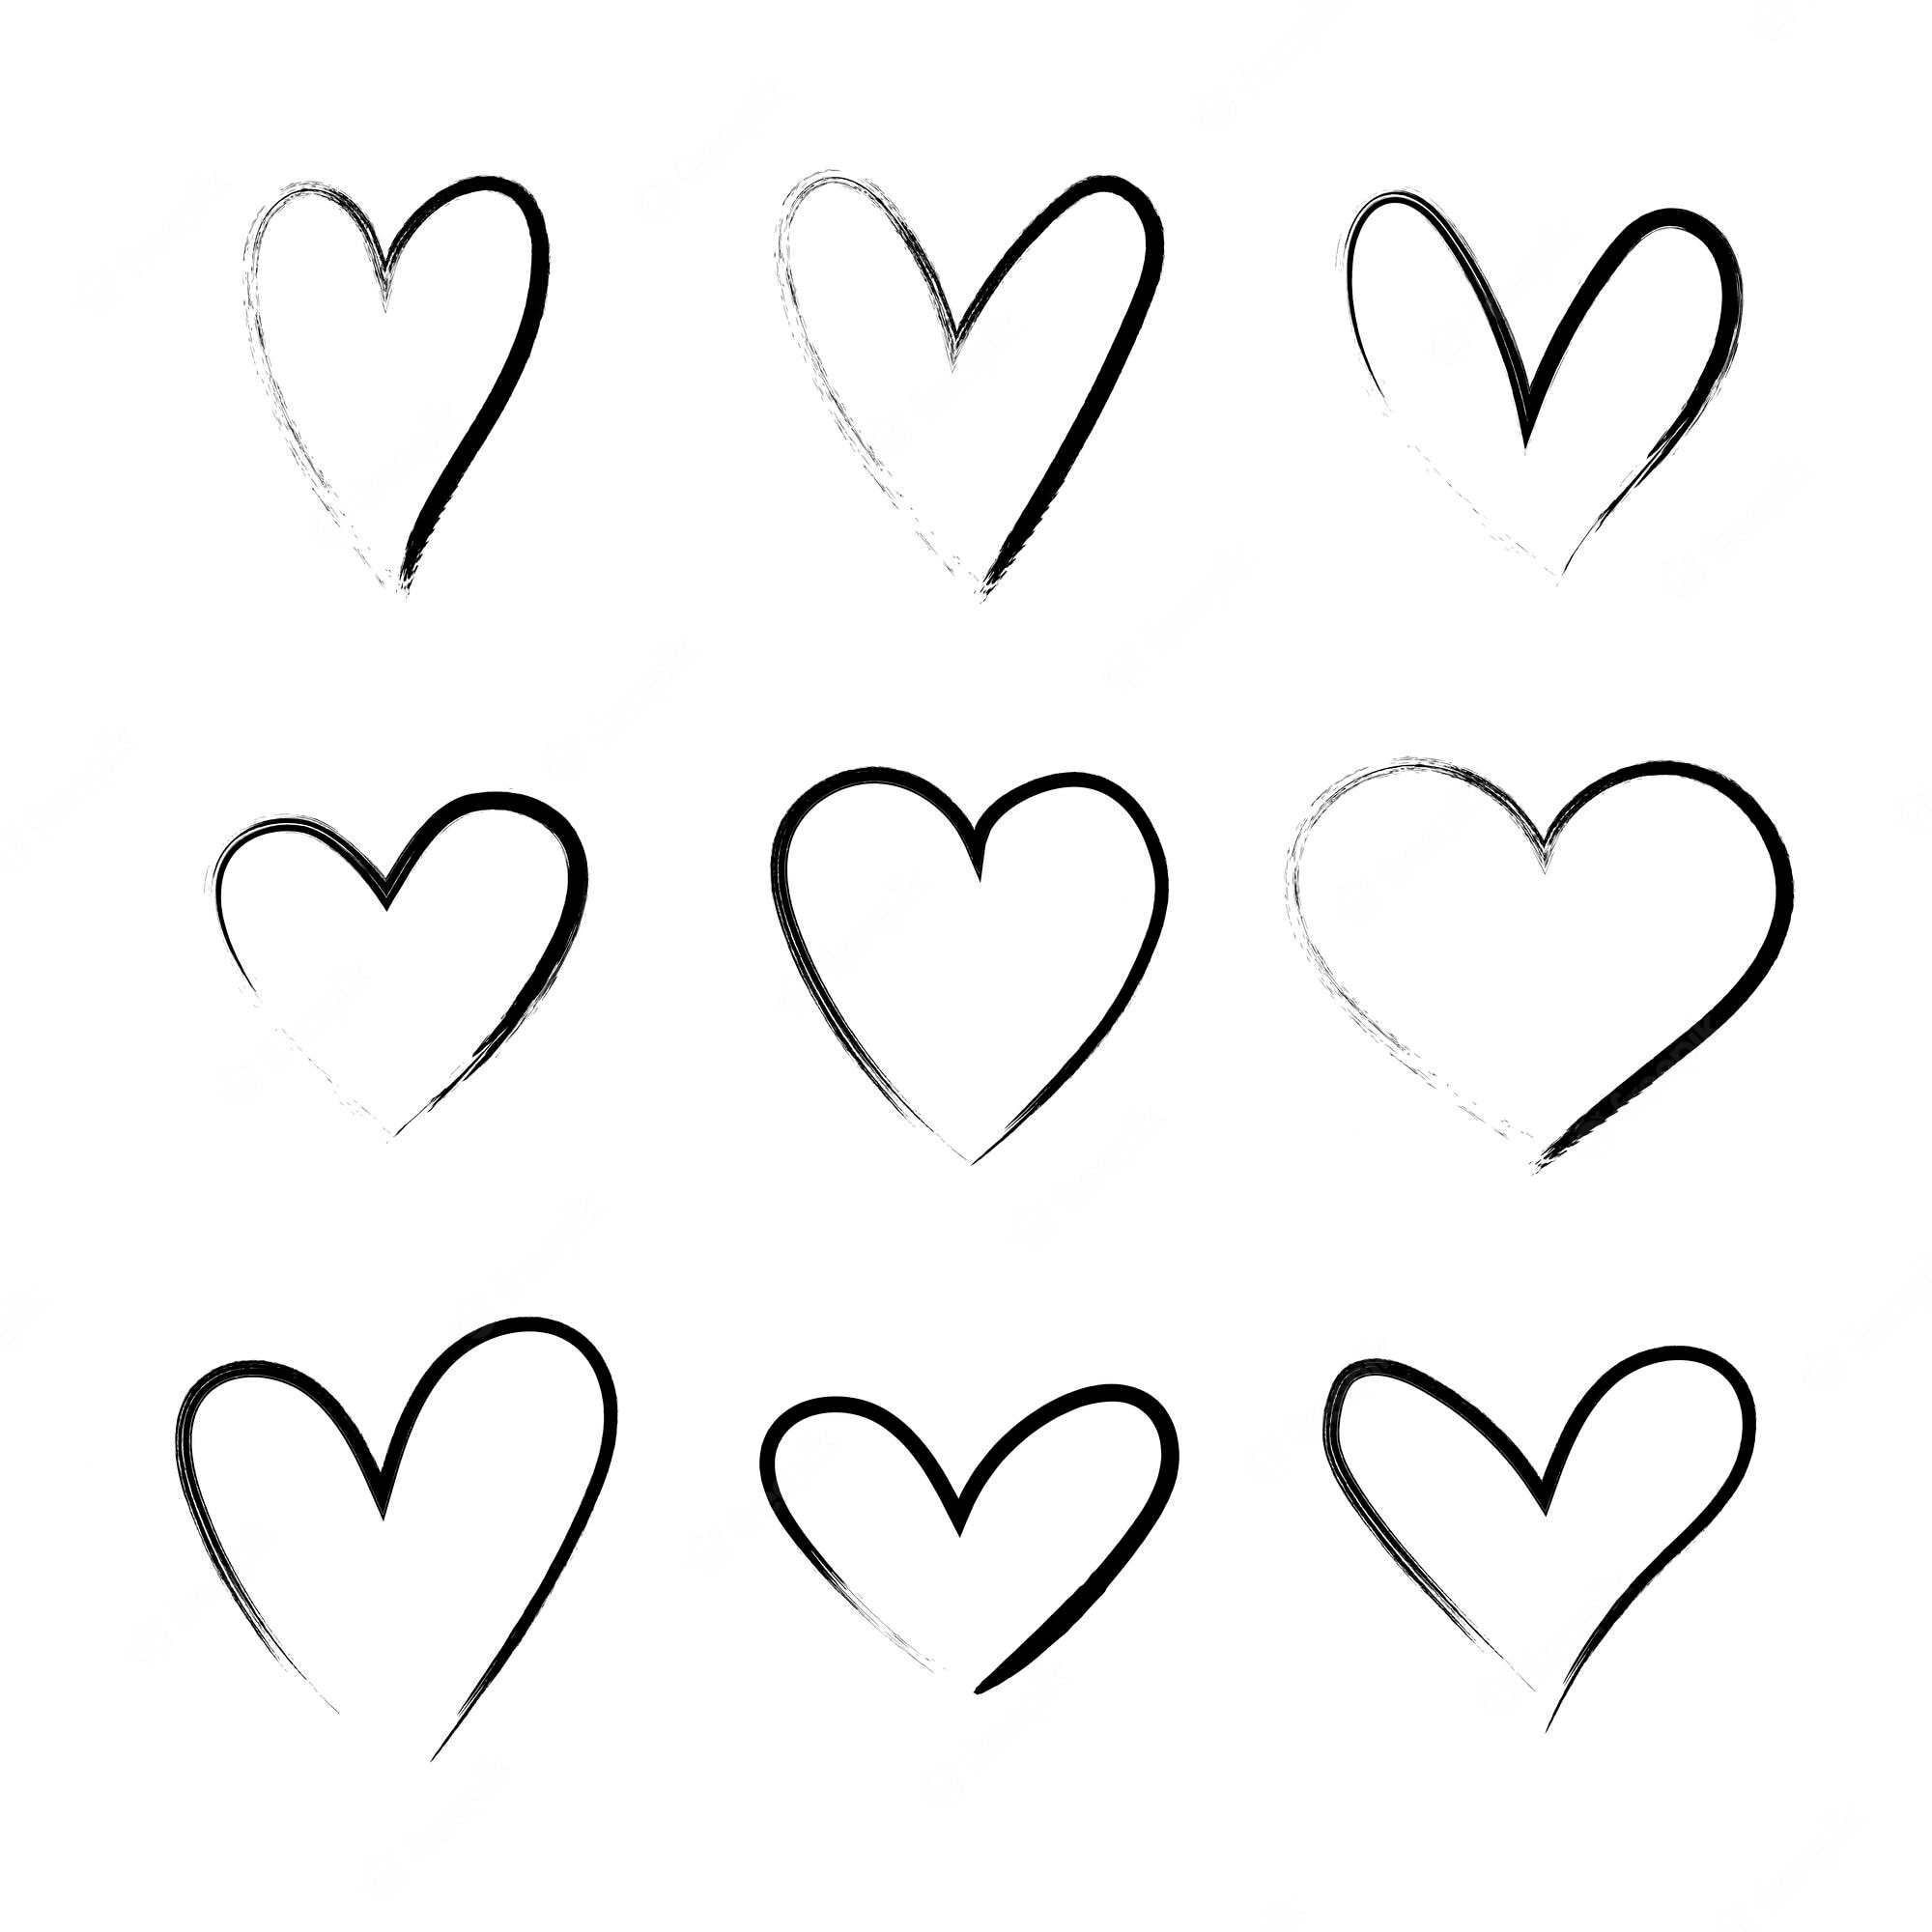 Premium Vector Heart Hand Drawn Grunge Icons Set Isolated On